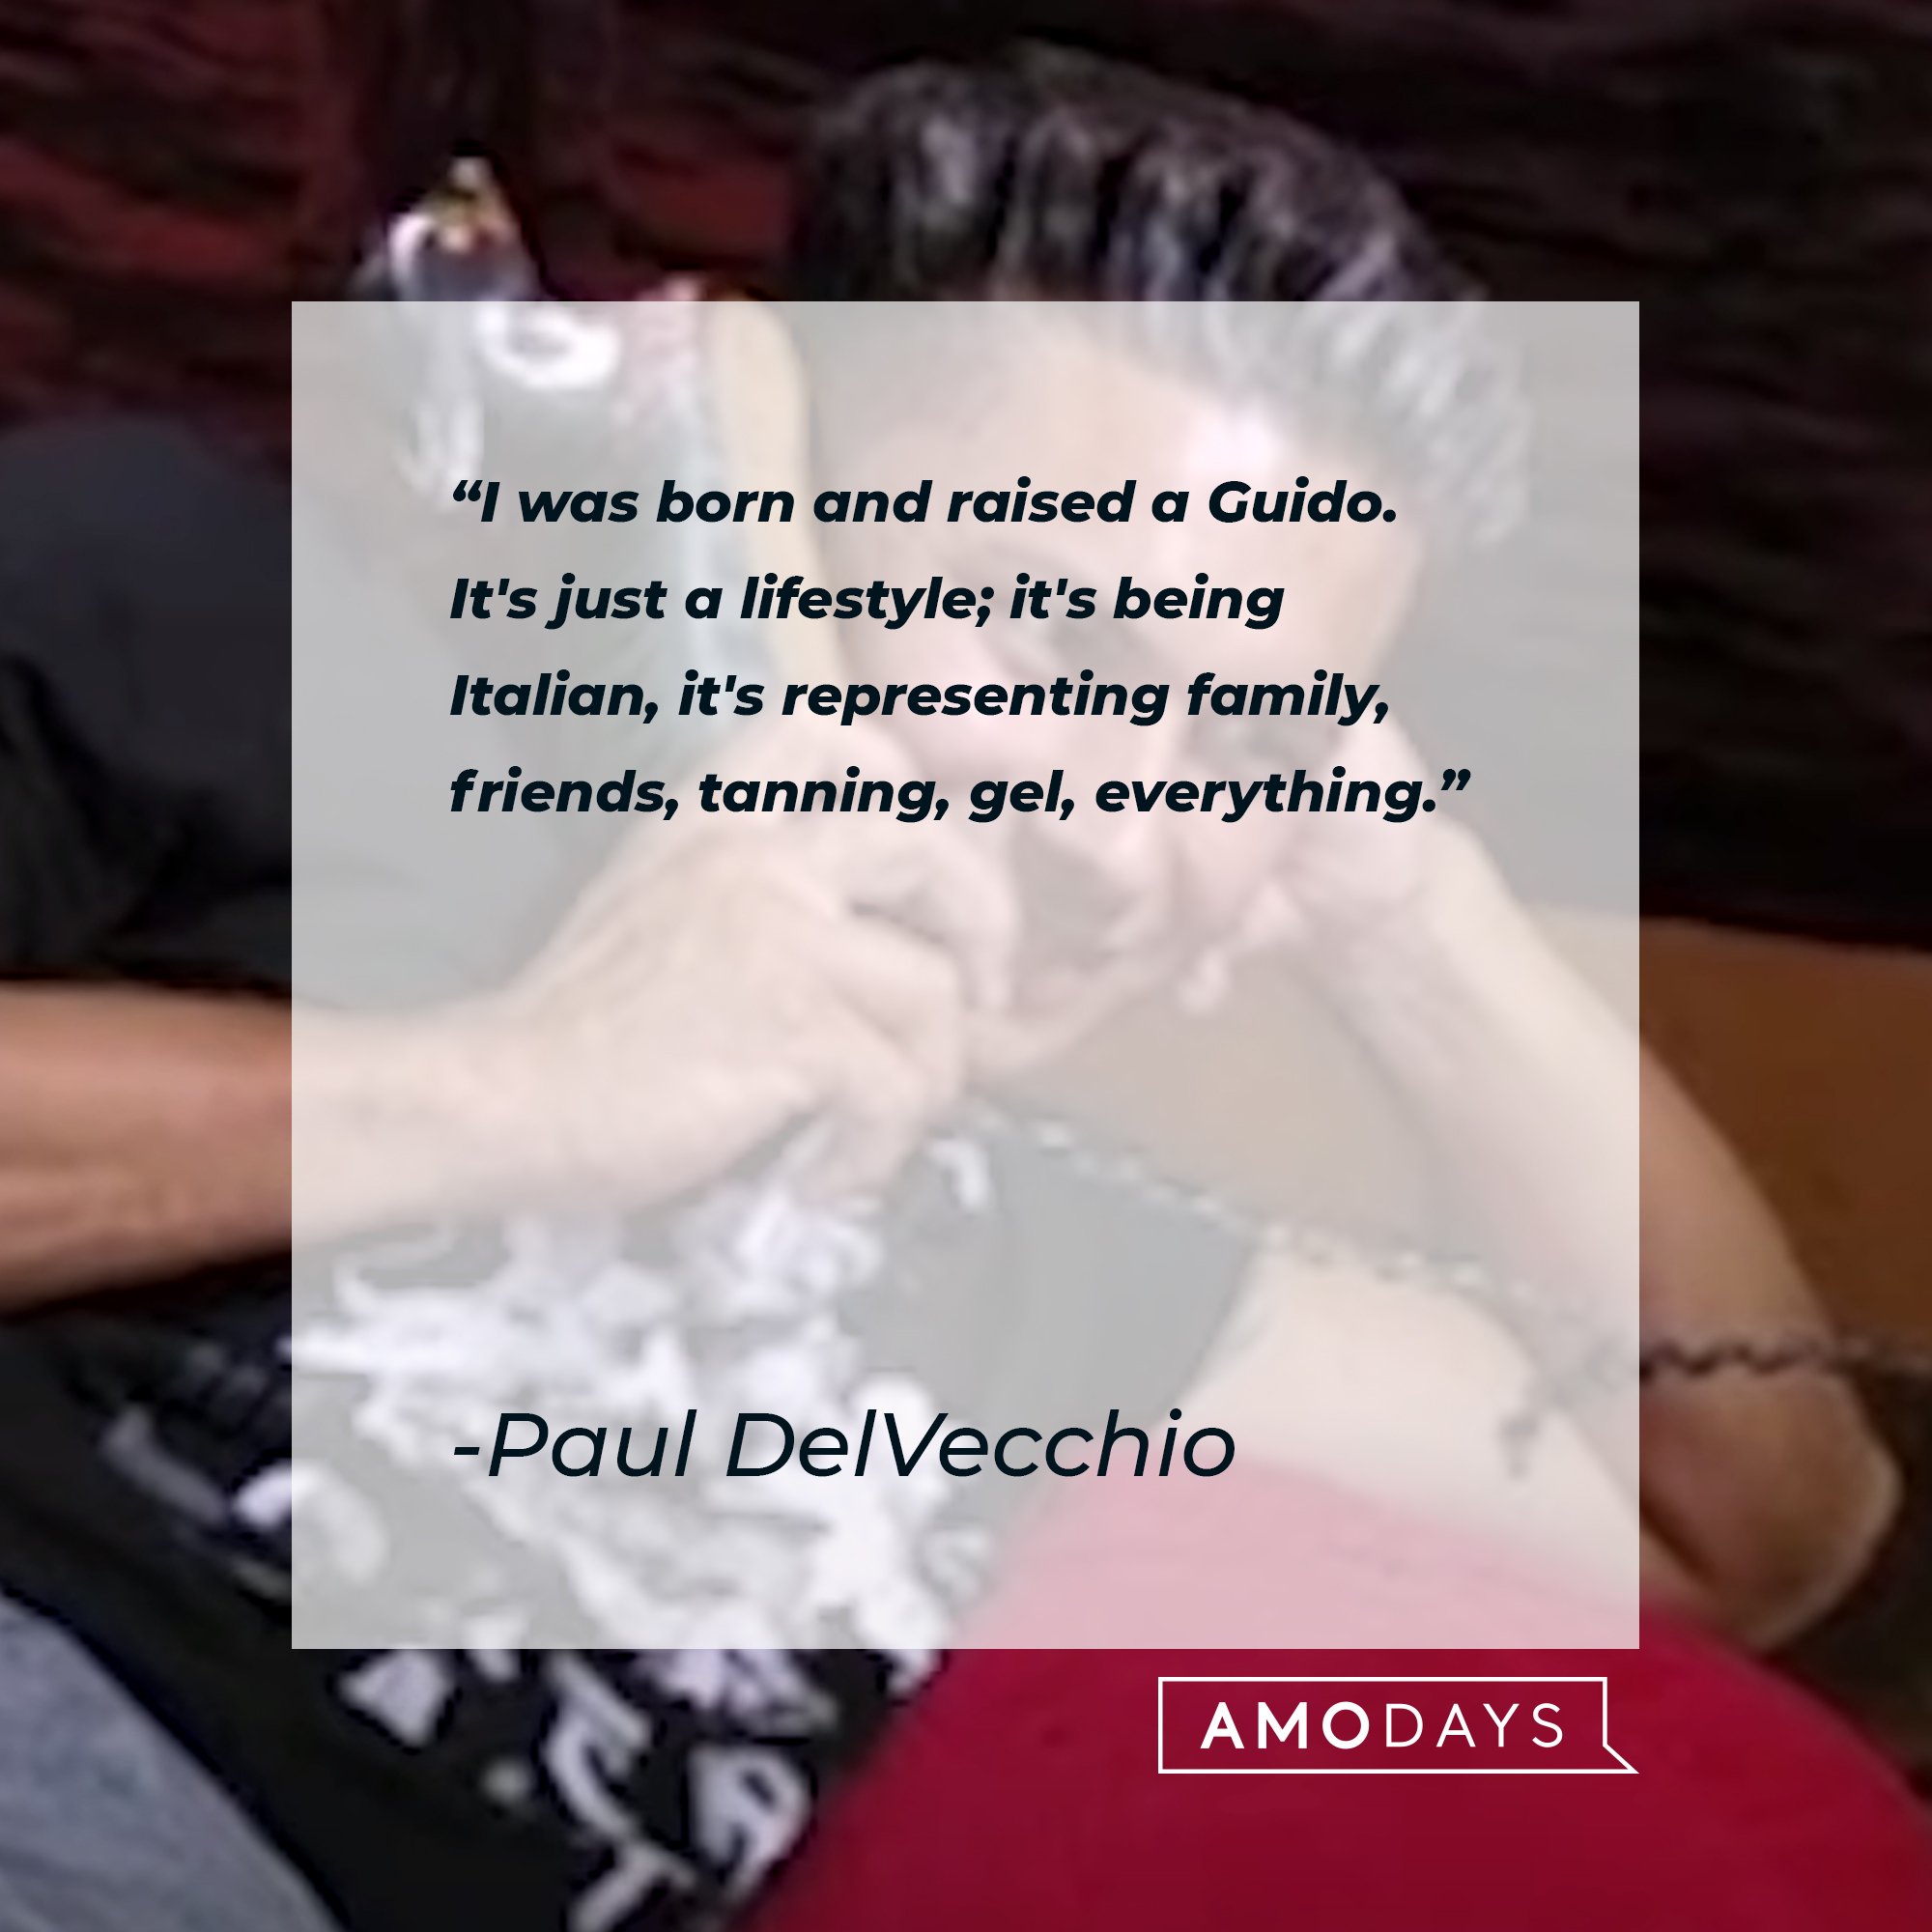 Paul DelVecchio‘s quote: "I was born and raised a Guido. It's just a lifestyle; it's being Italian; it's representing family, friends, tanning, gel, everything." | Image: AmoDays